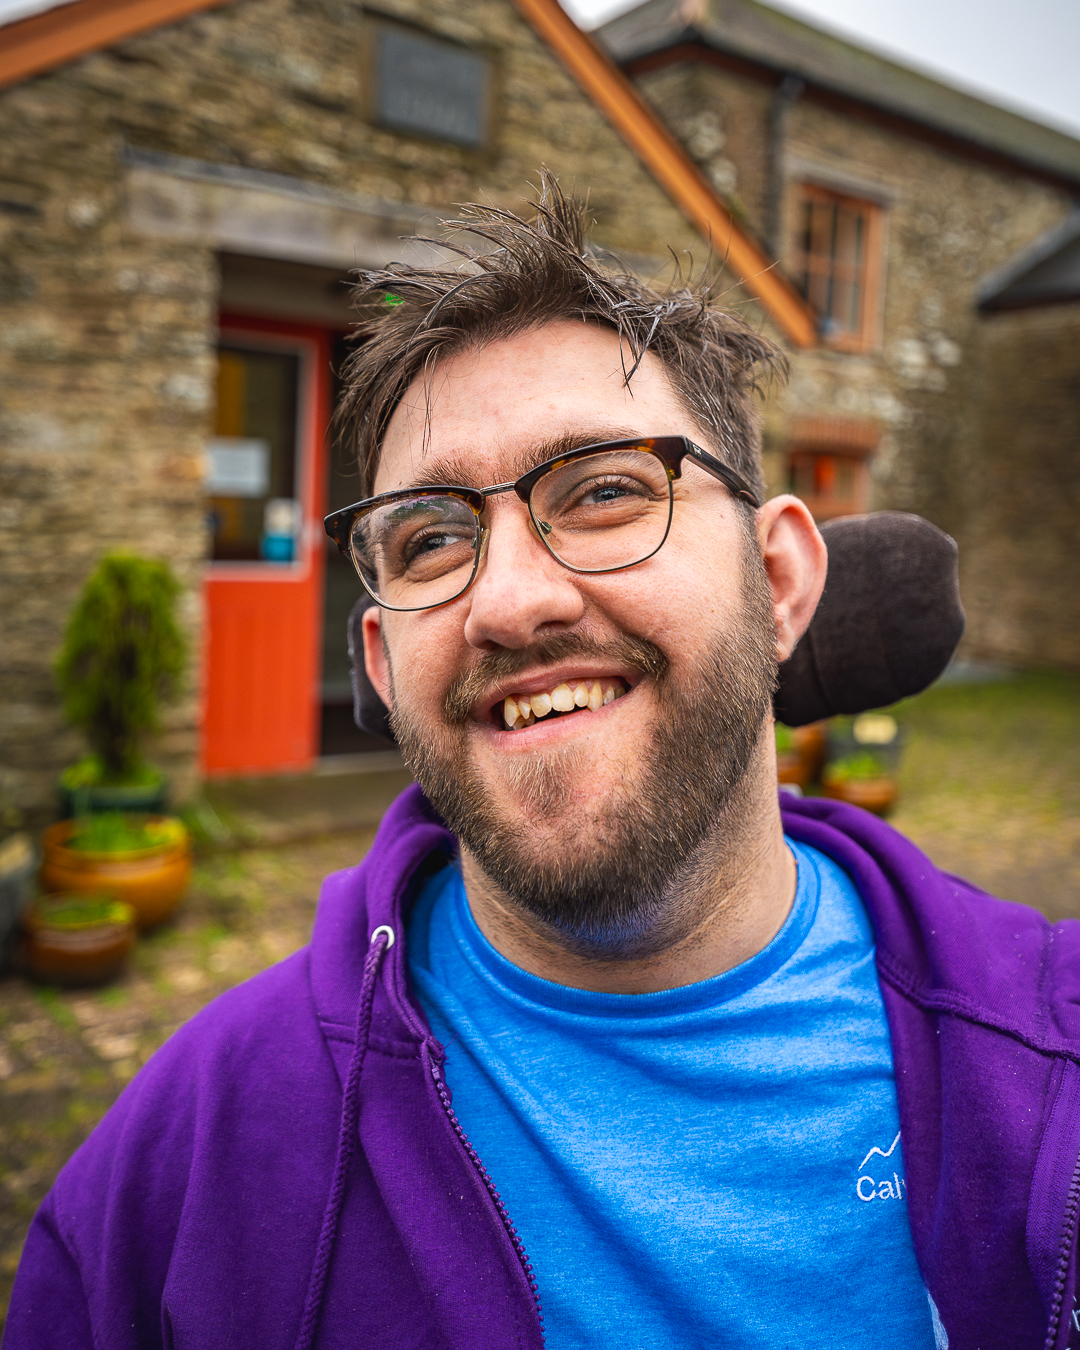 A man with spiky brown hair and a beard, wearing glasses, a blue t-shirt and a purple hooded sweatshirt is smiling at the camera in front of an old stone building.